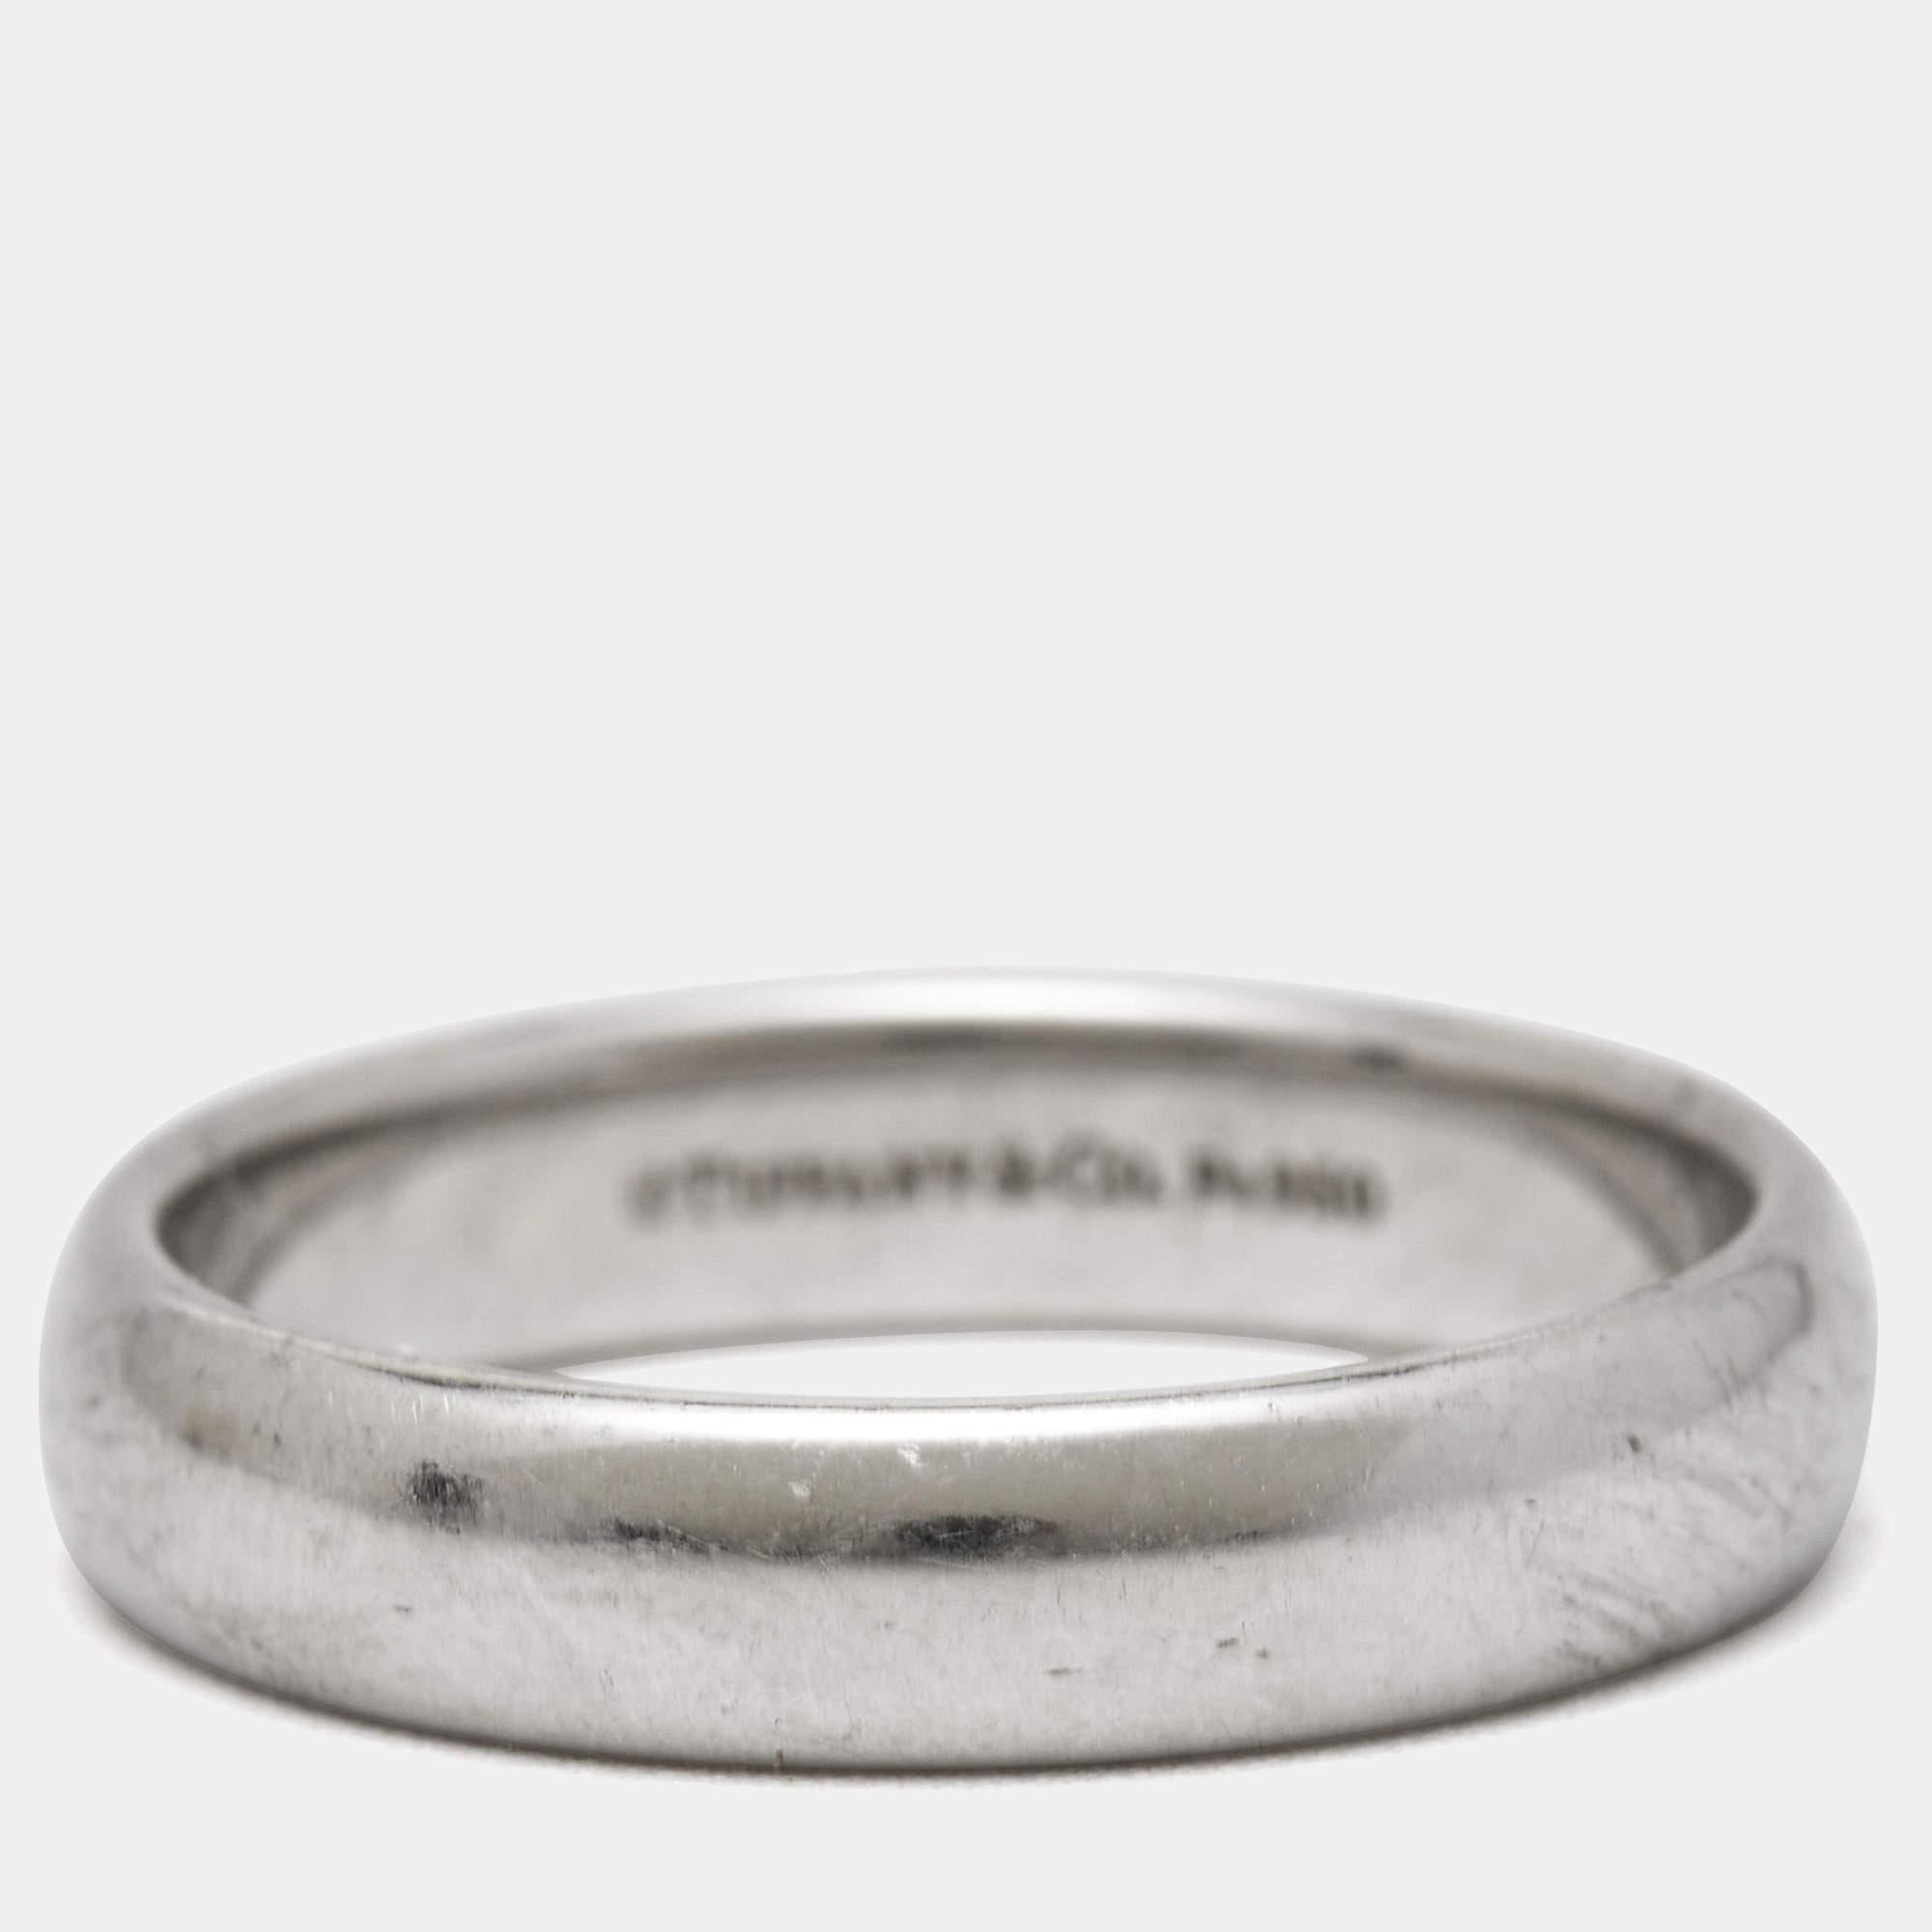 The Tiffany & Co. Forever wedding ring is a symbol of everlasting love and commitment. Crafted from lustrous platinum, it features a timeless design with a smooth surface and a comfortable fit. This elegant ring exudes sophistication and is a